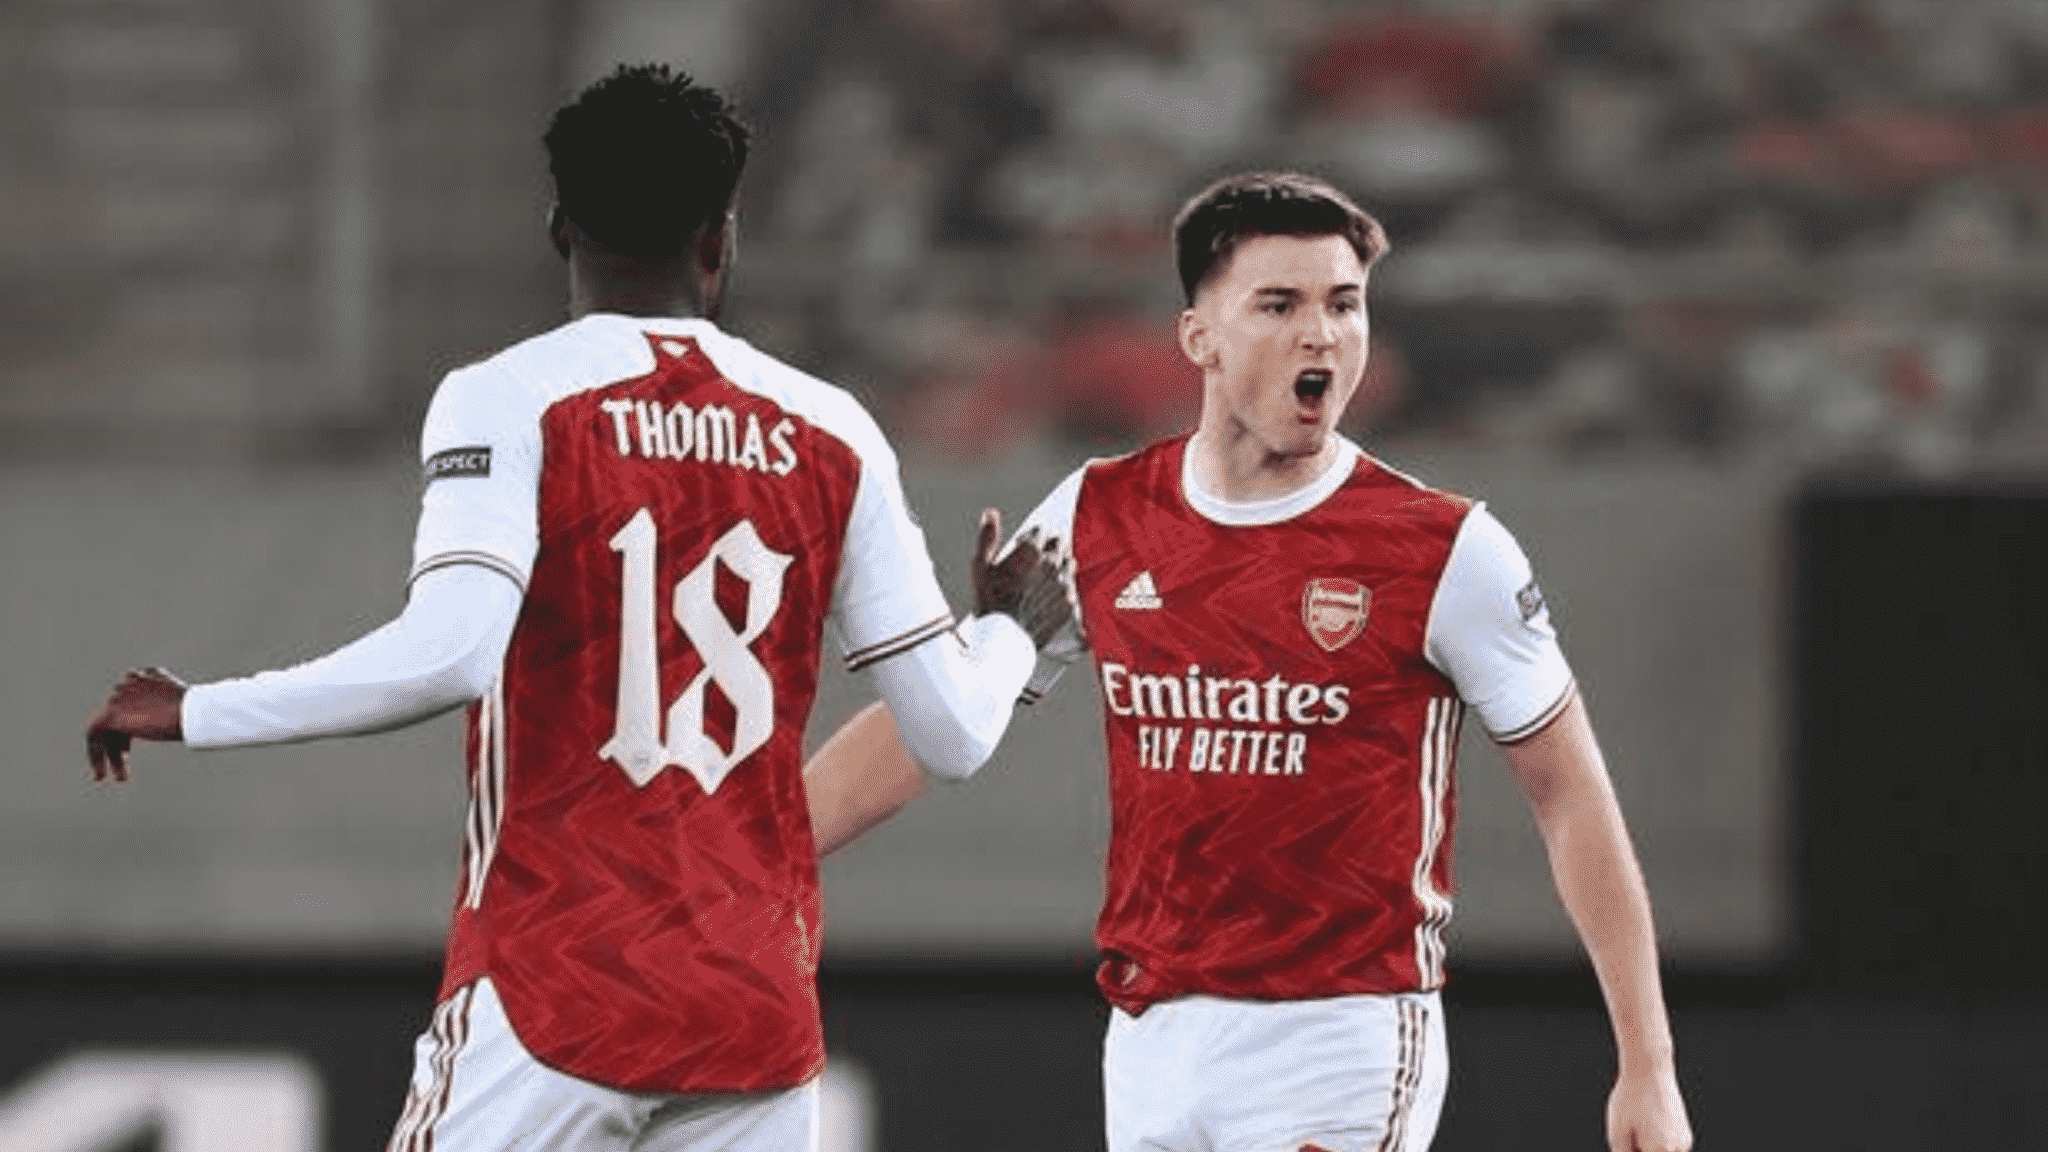 Arsenal Face Crisis in Key Moment of Season with Injuries to Kieran Tierney and Thomas Partey, My Football Facts